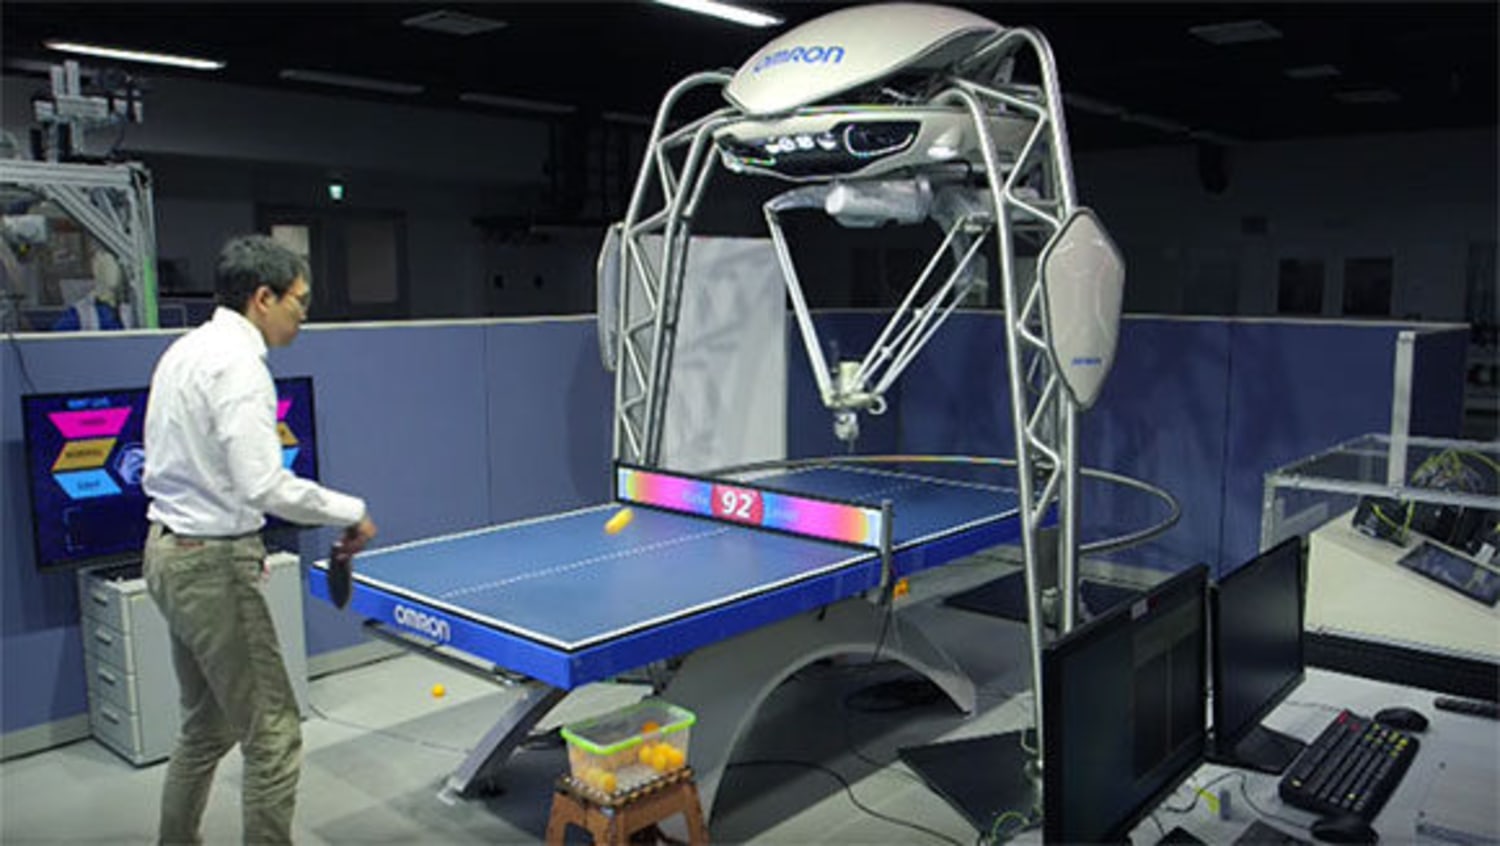 Does this hypothetical ping pong match between a human and robot